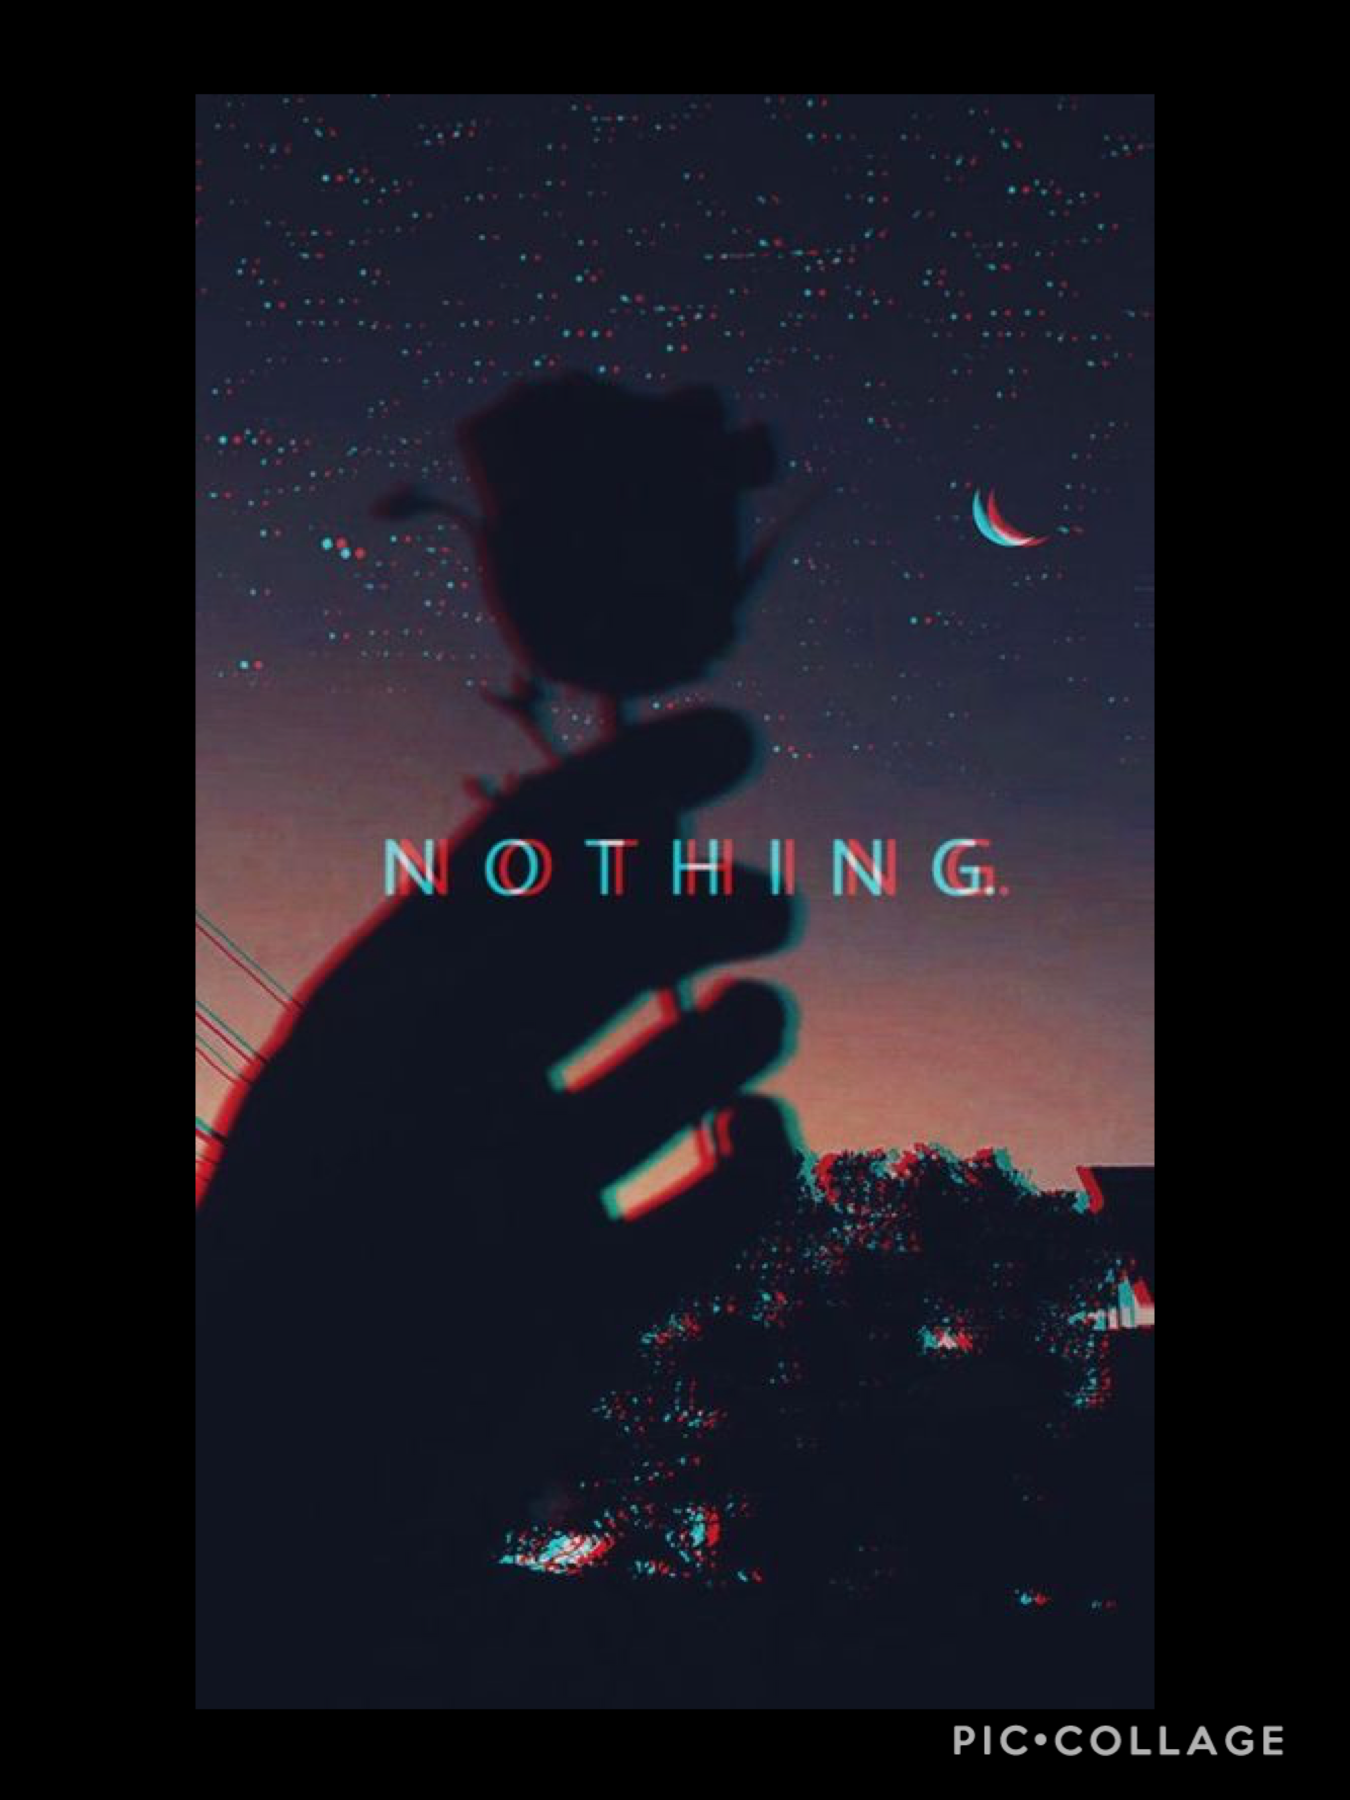 Nothing really